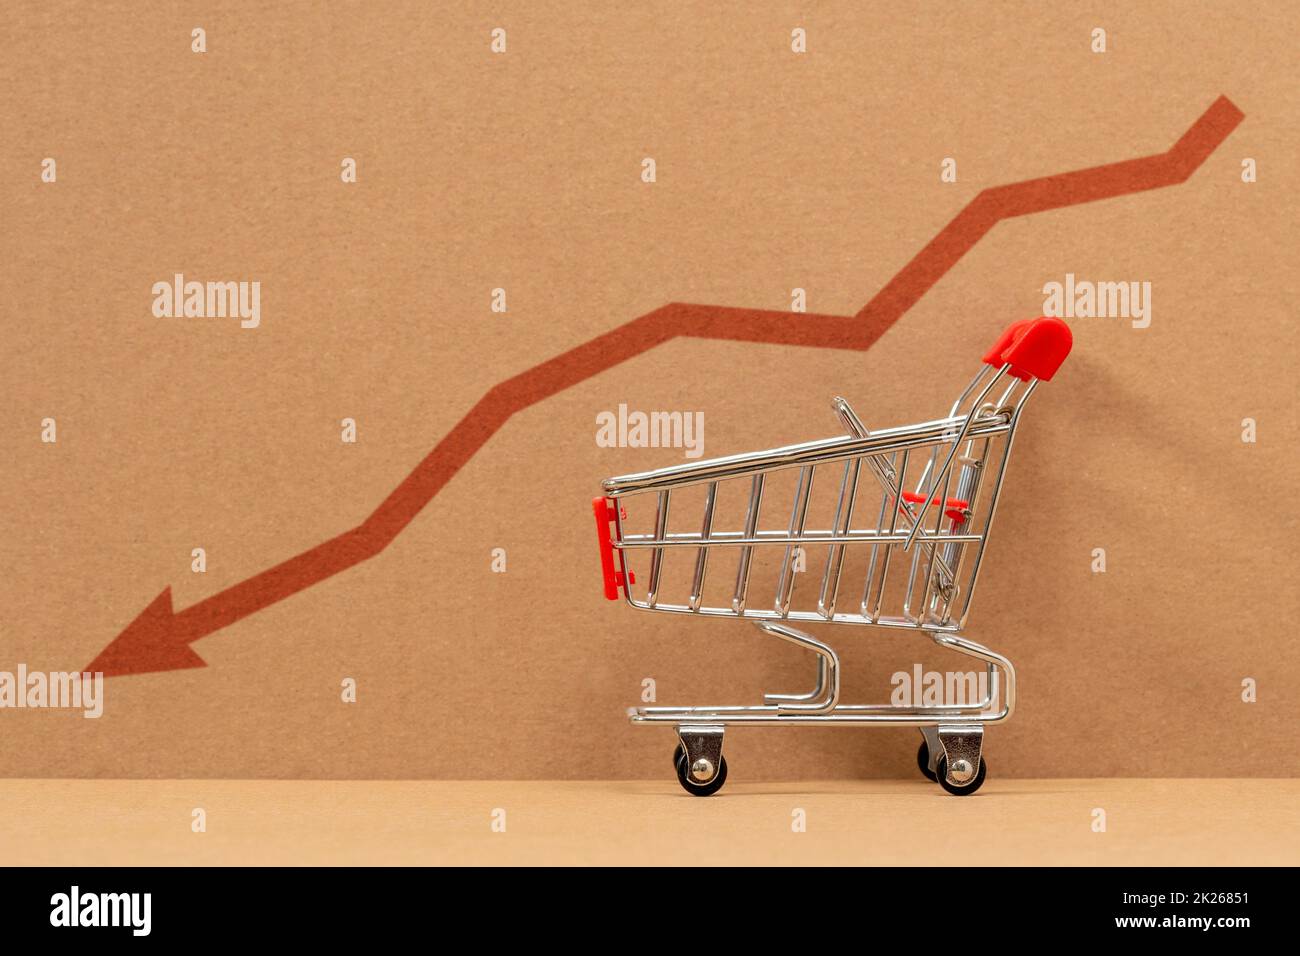 Empty grocery cart with the indicator of a falling economy Stock Photo